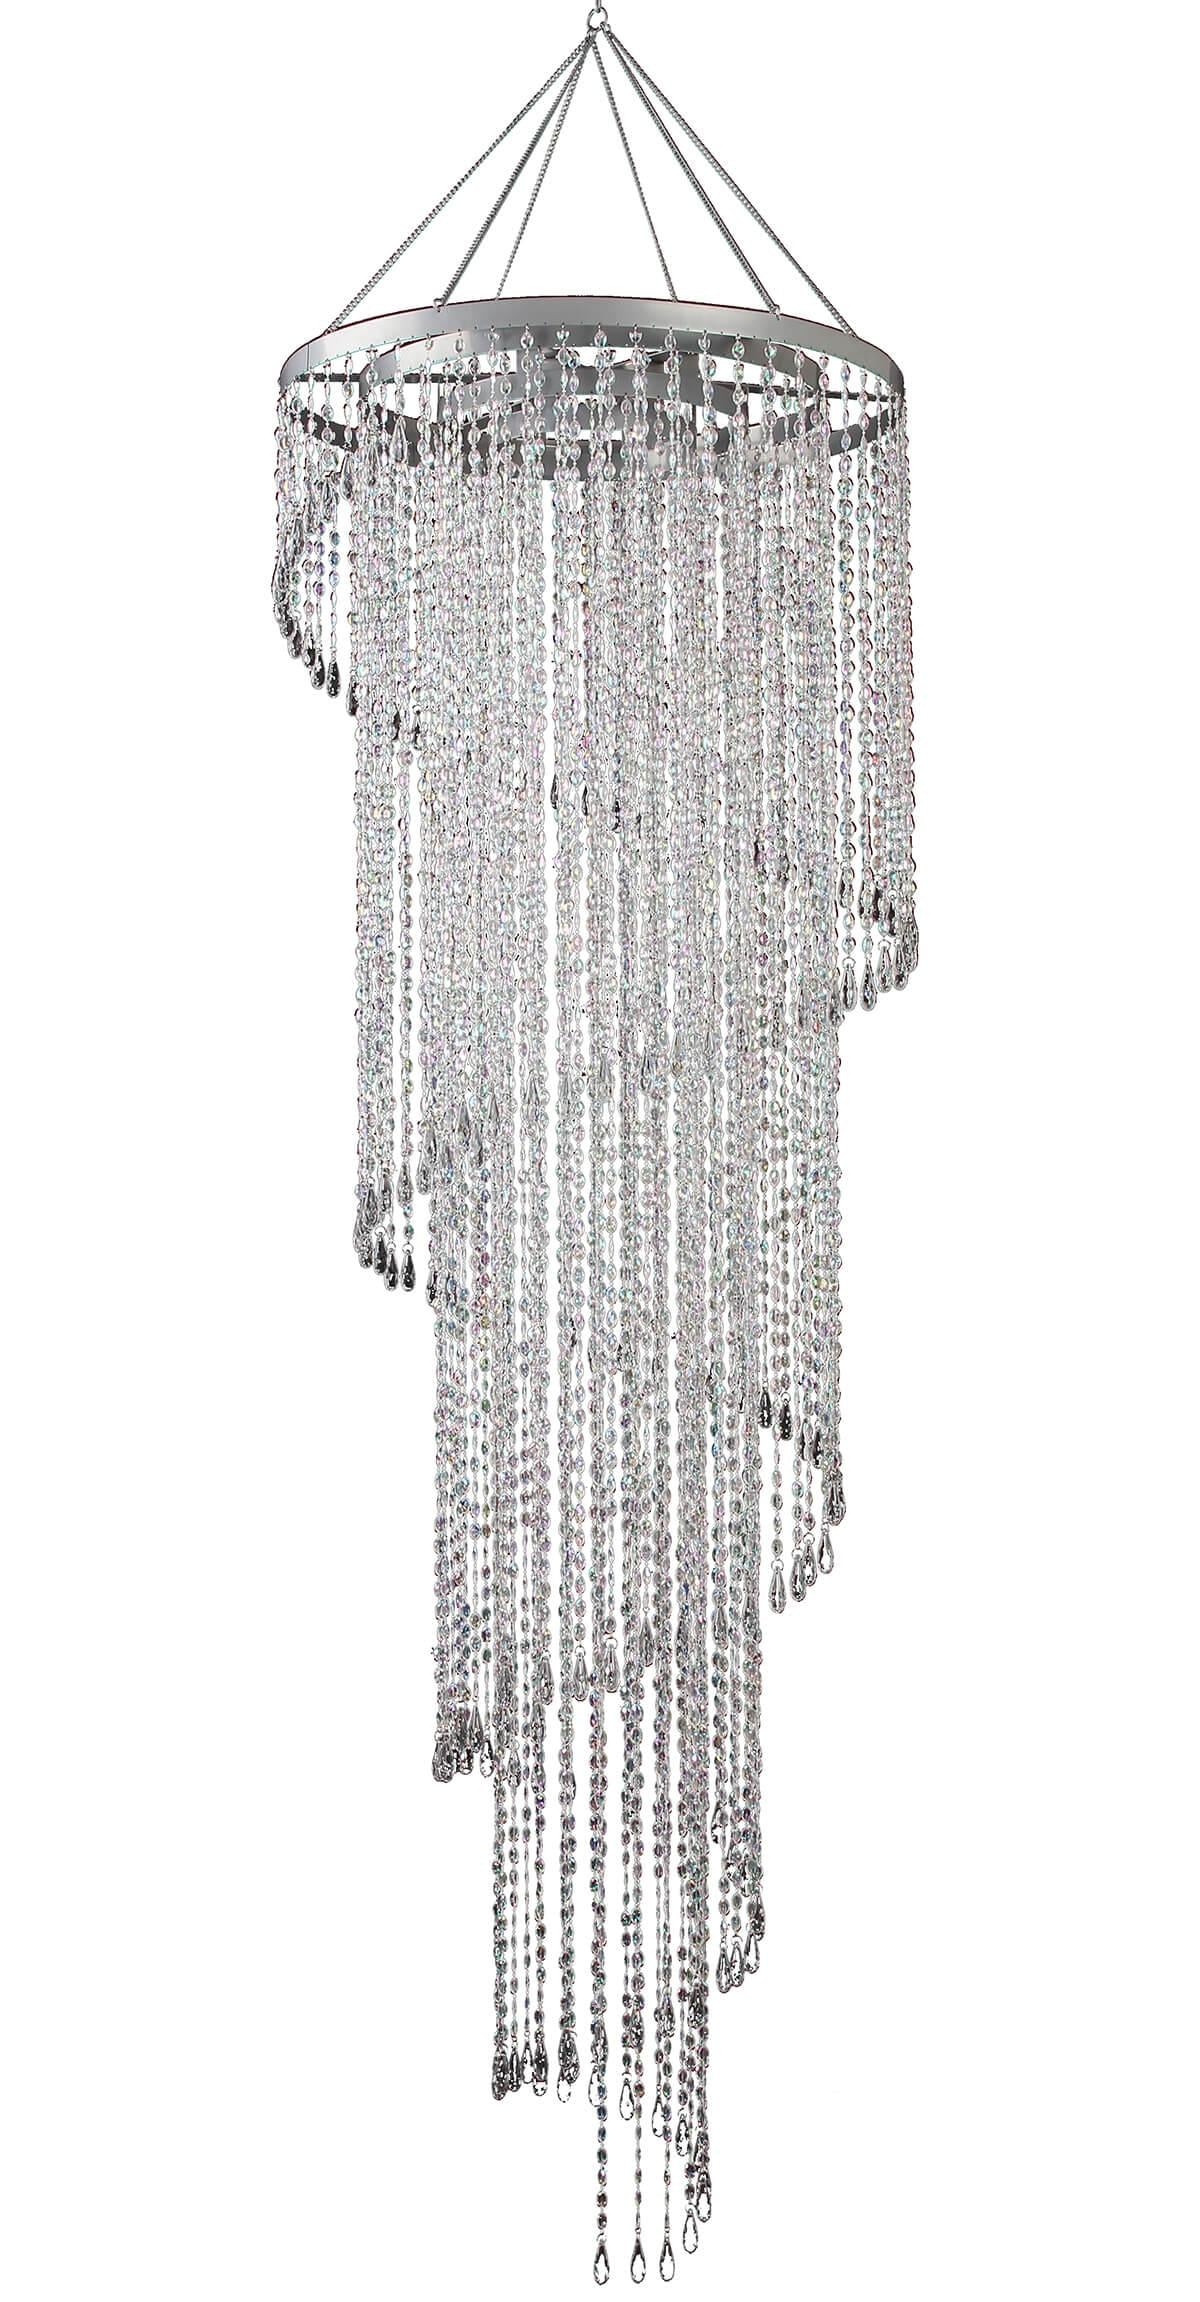 Crystal Chandelier, Round 24in x 72in, with lighting kit